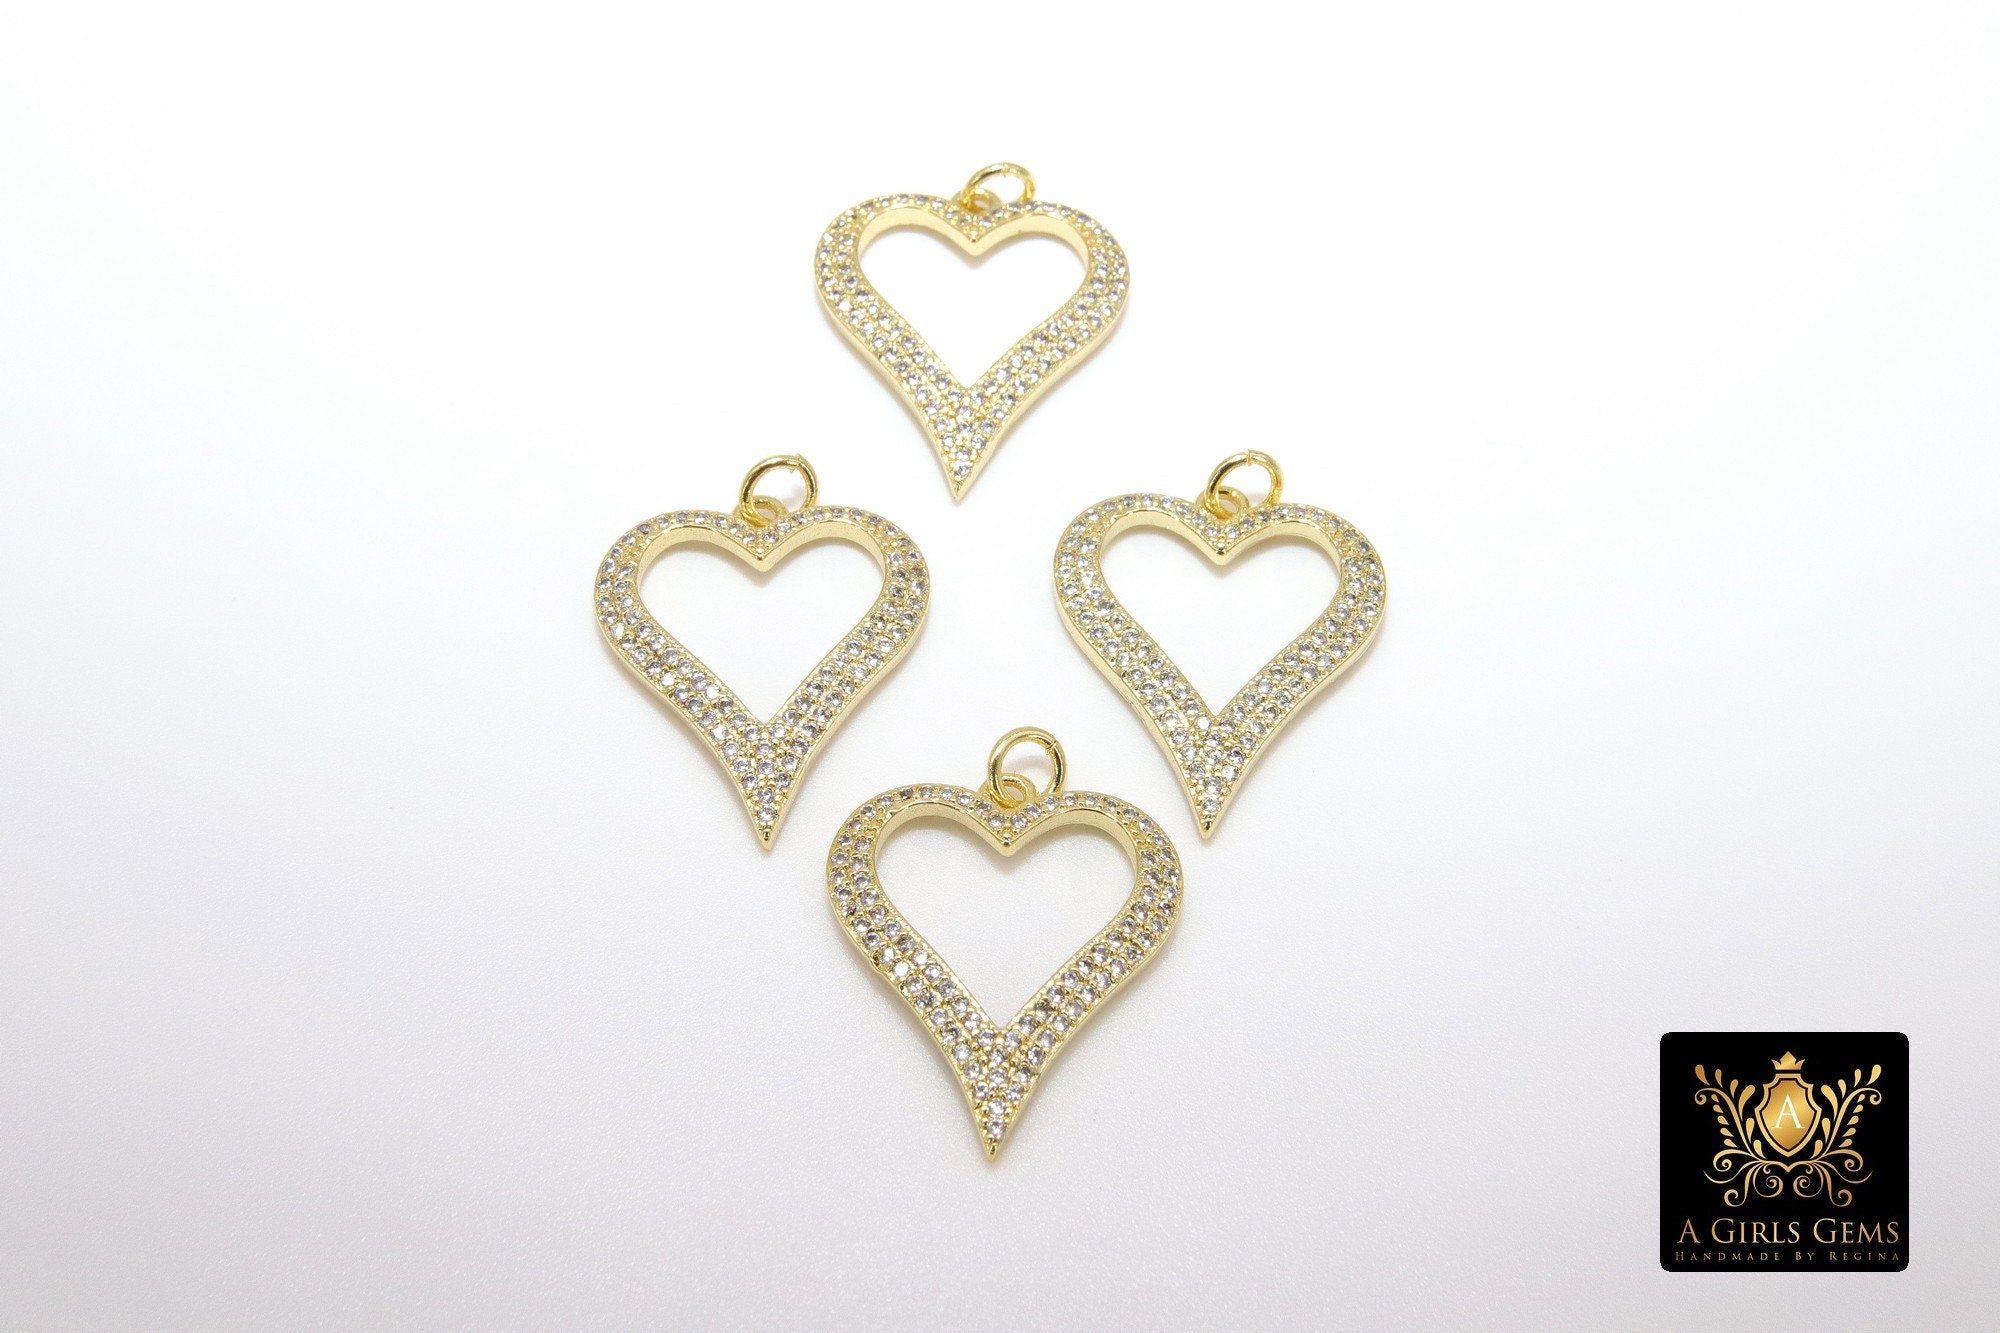 Cubic Zirconia Heart Charms, Gold CZ Micro Pave Heart Shaped Pendants for Sweetheart Bracelet, #719 Necklace Jewelry, 19 x 23 mm - A Girls Gems